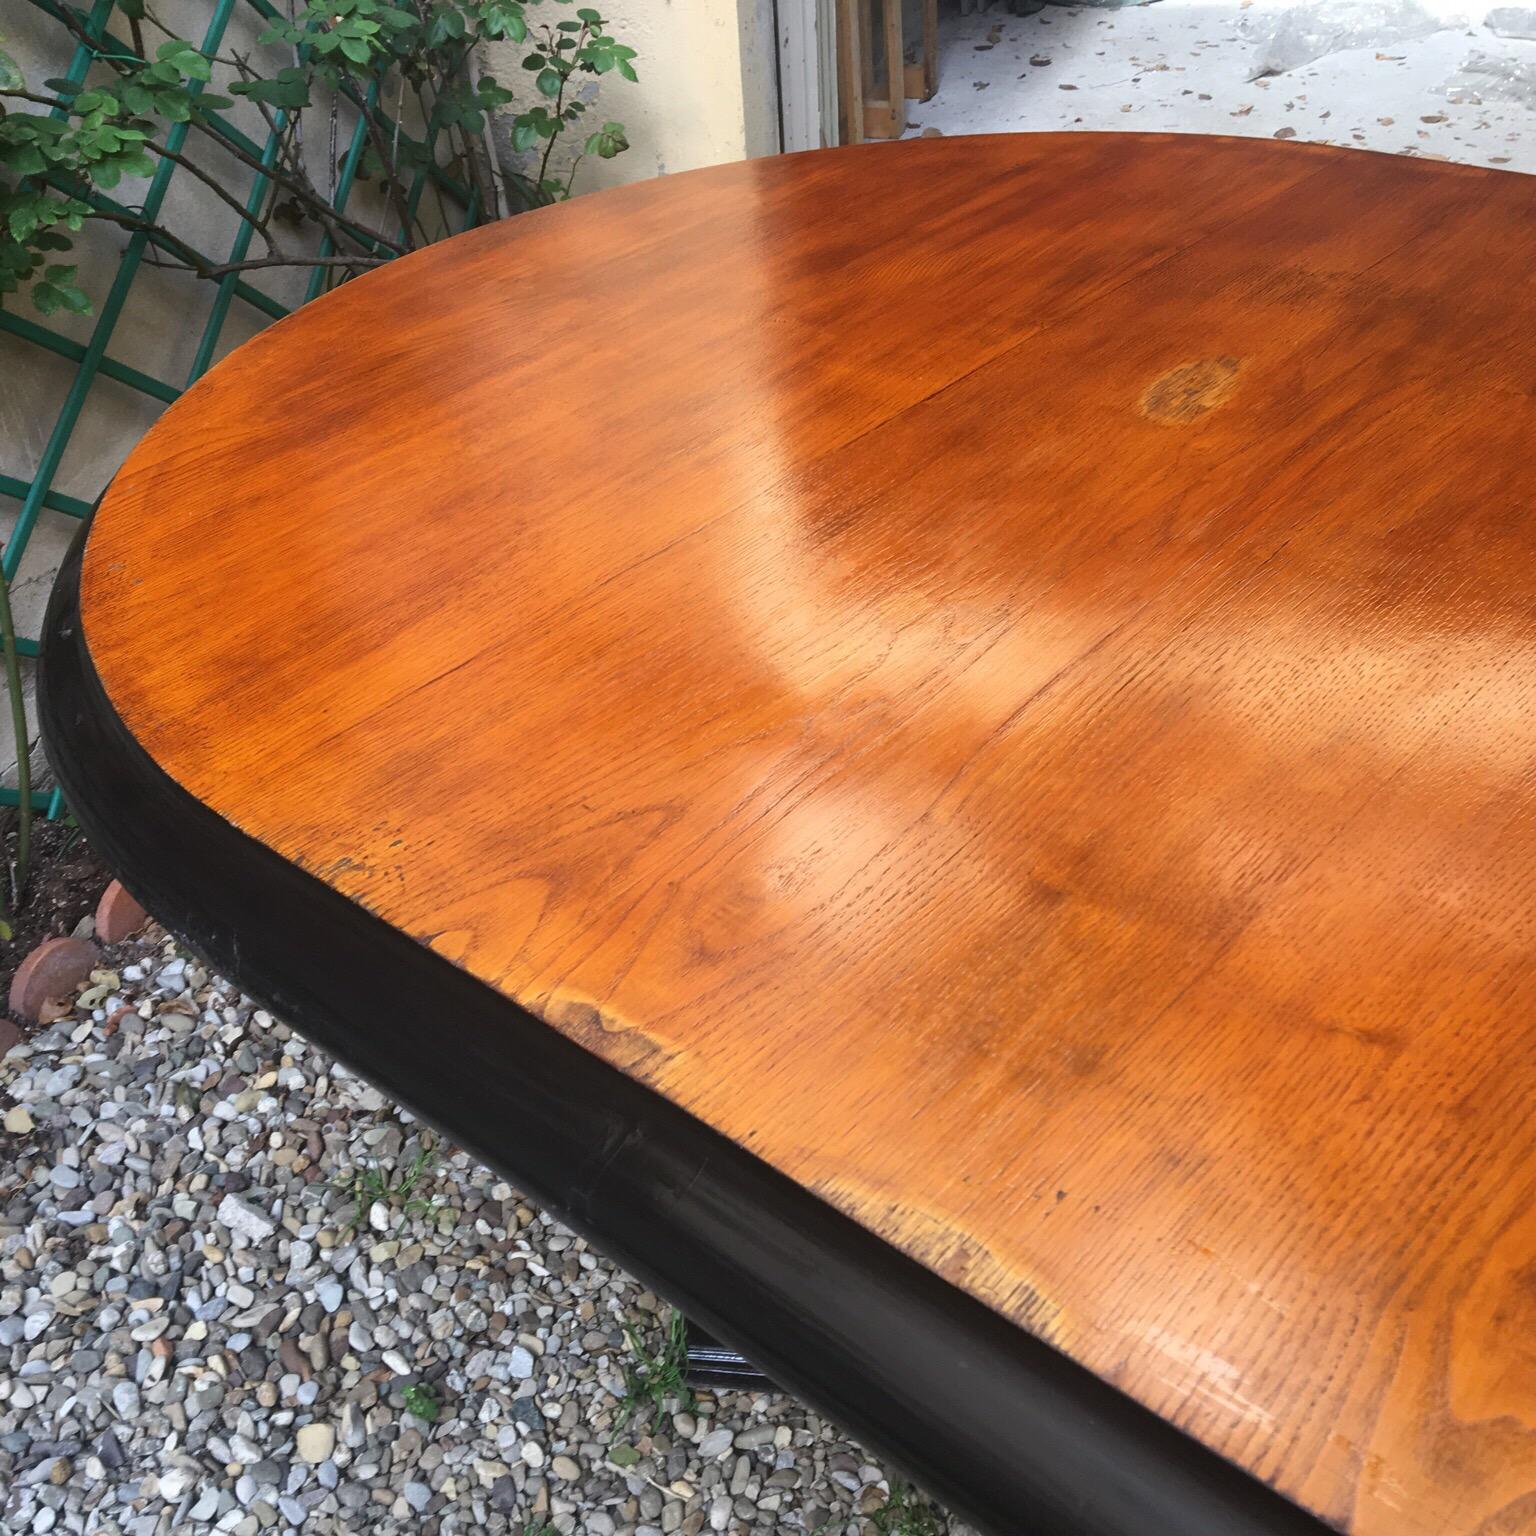 Art Deco Oval Dining Table in Mahogany Wood with Black Ebonized Edge, 1940s For Sale 5